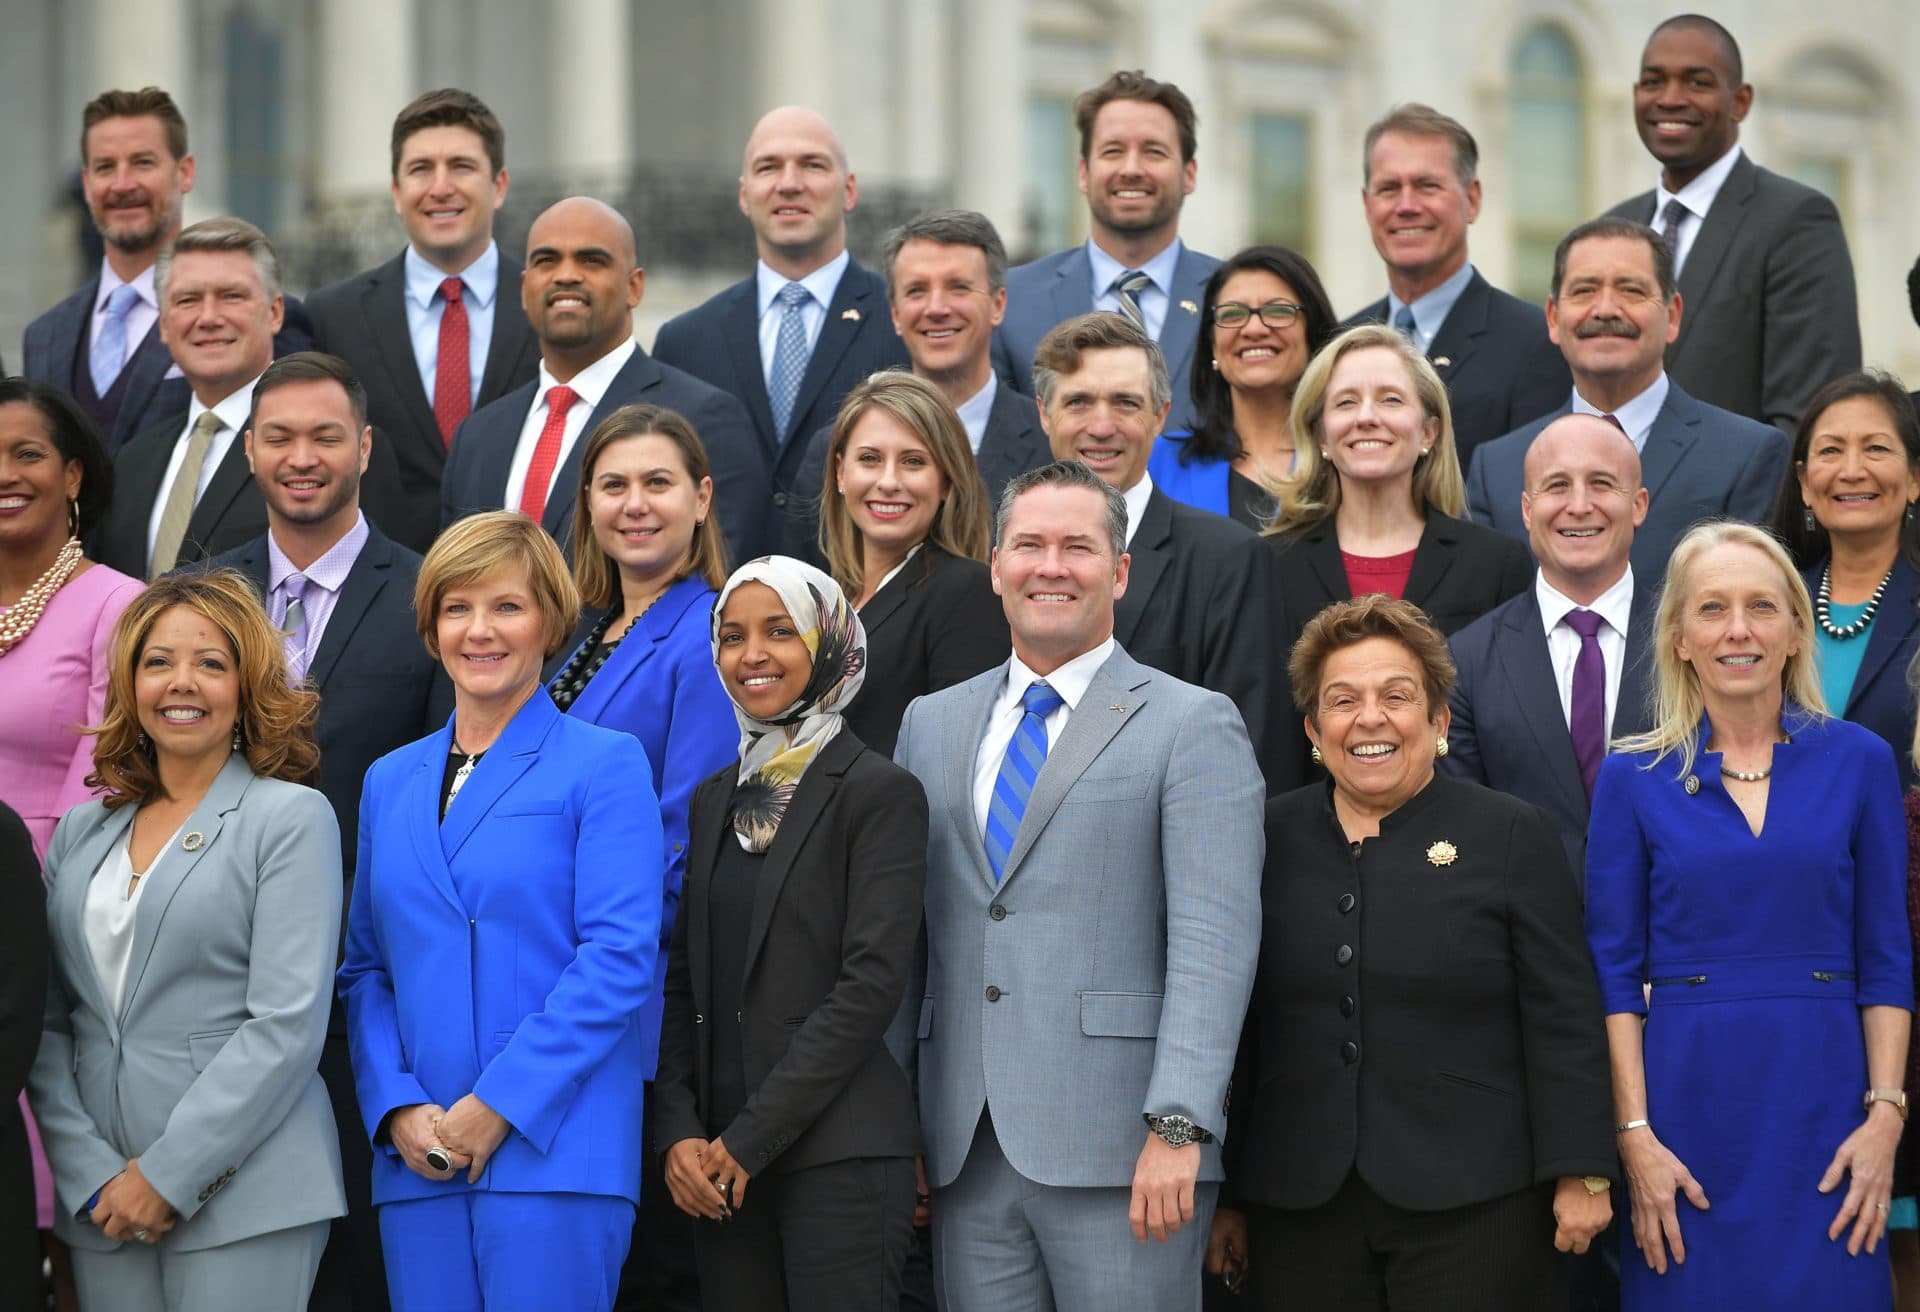 #DemsTakeTheHouse With Diverse Class of Legislators